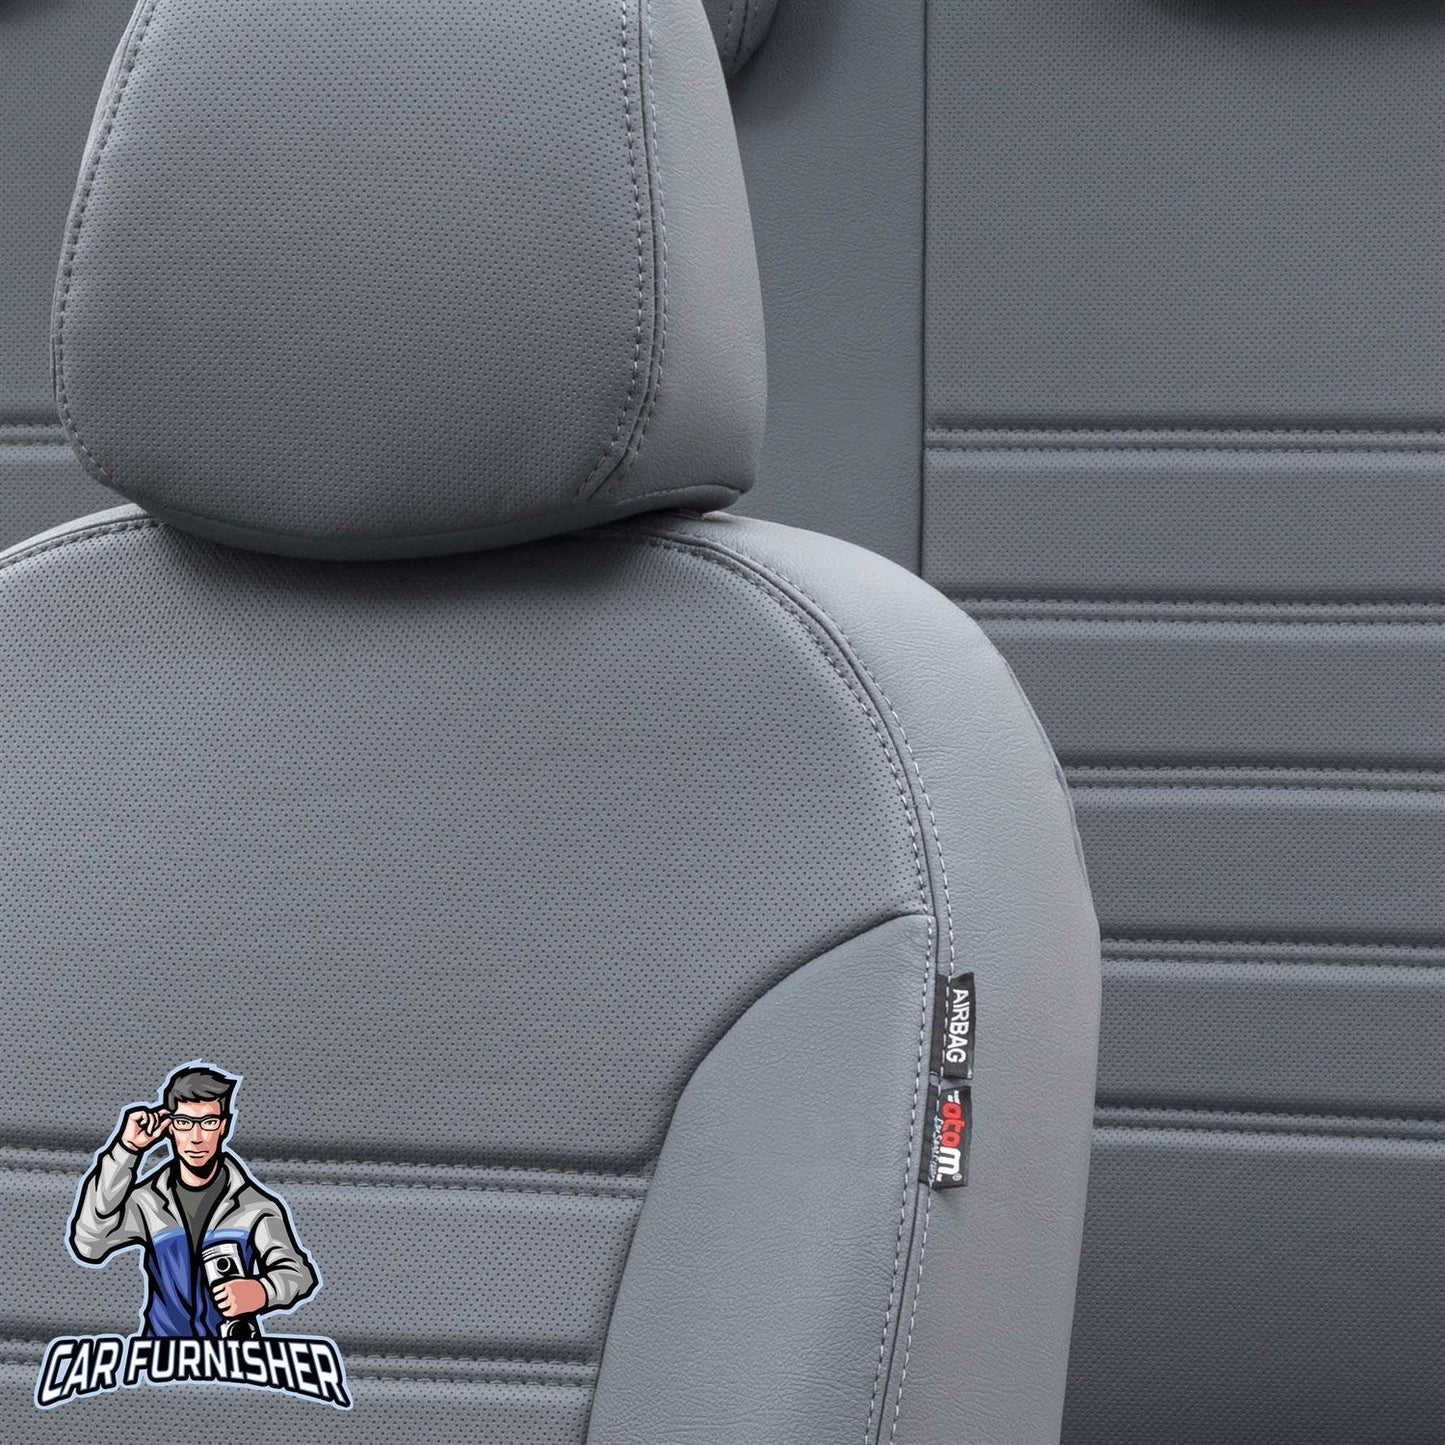 Isuzu N-Wide Seat Covers Istanbul Leather Design Smoked Leather